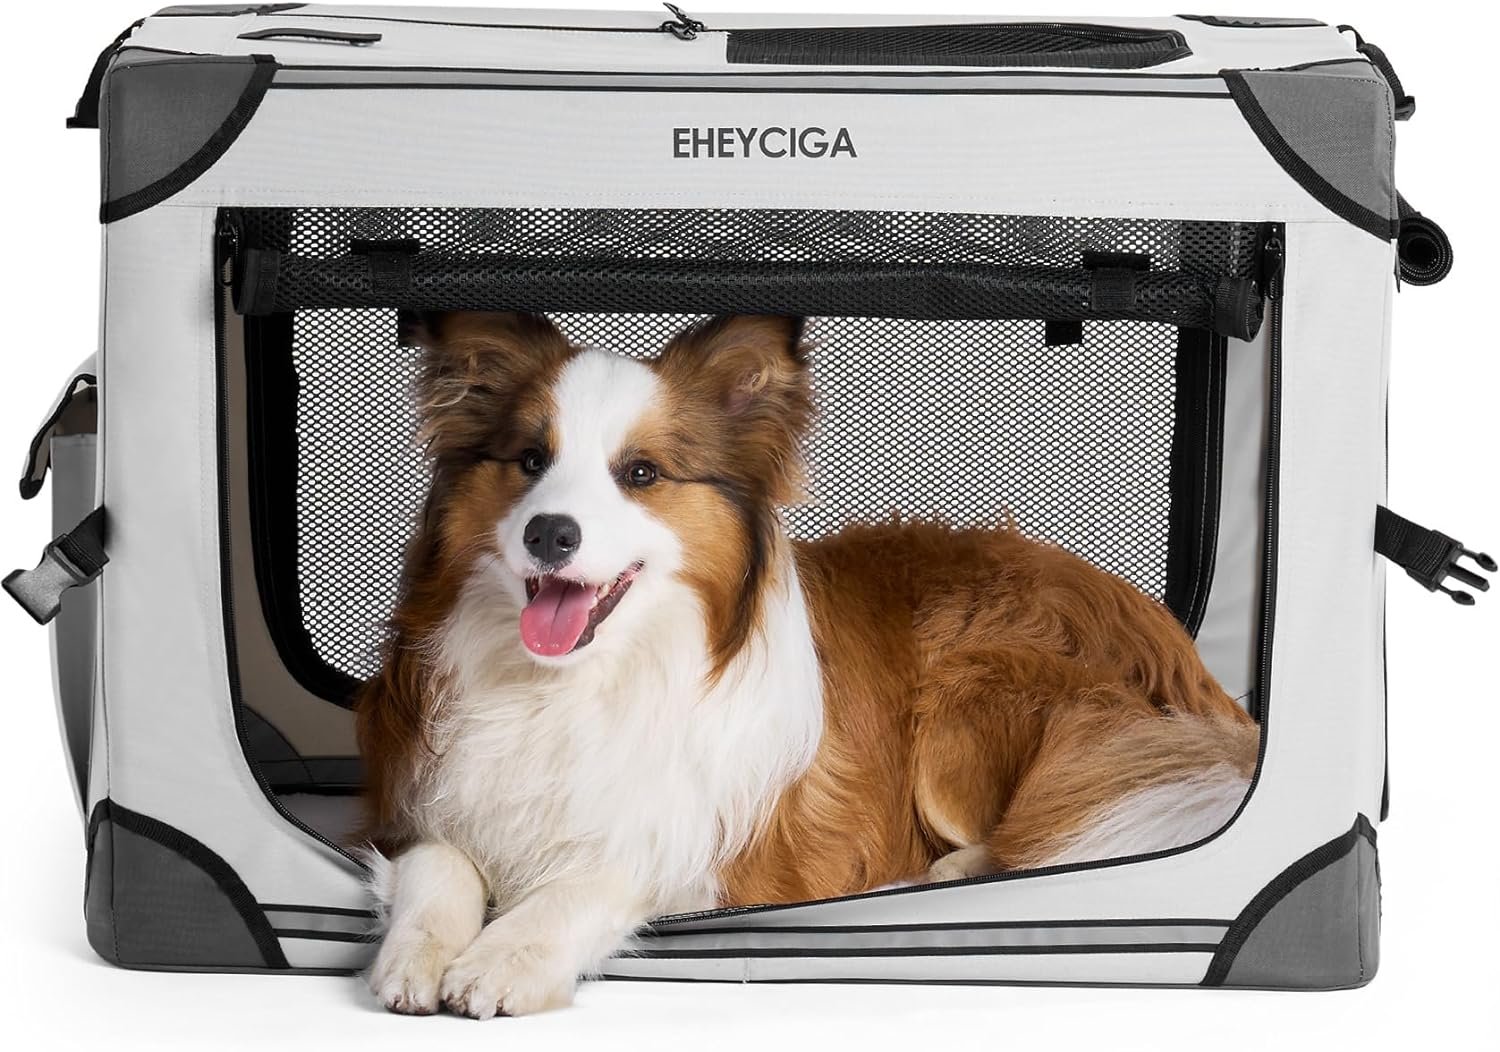 eheyciga collapsible small dog crate 26 inch soft portable small dog kennel for travel indoor outdoor foldable dog trave 3